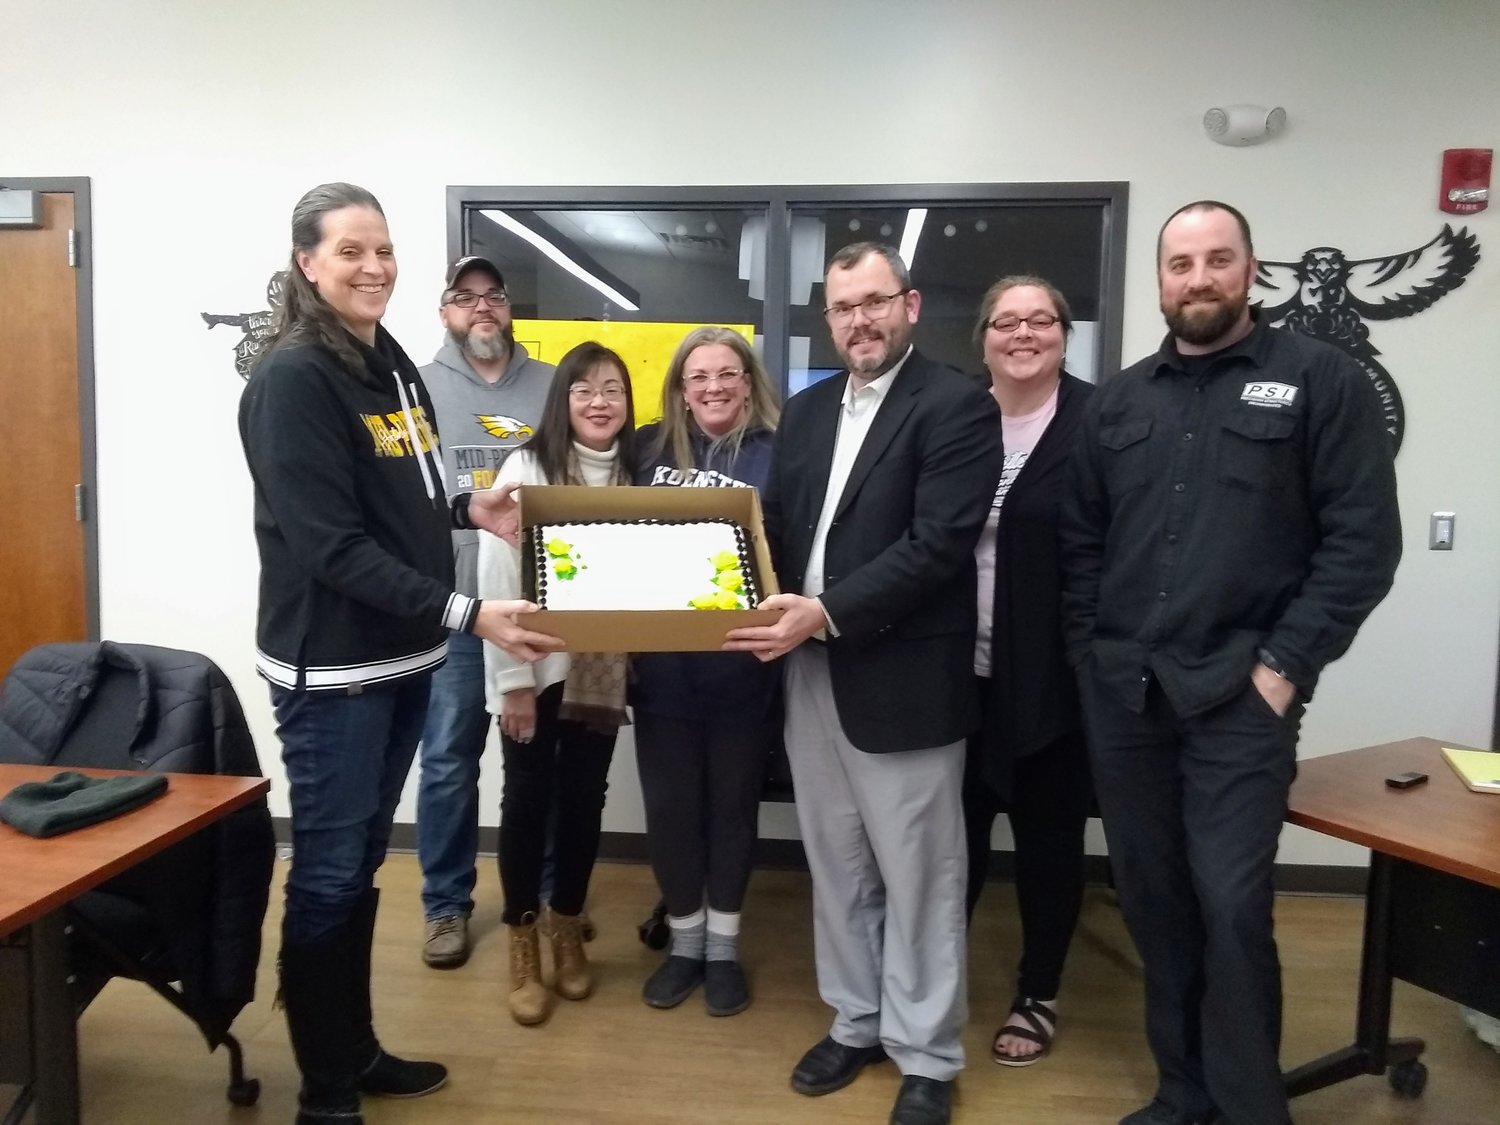 Superintendent Brian Stone presented school board members with a cake in recognition of School Board Appreciation Month at their regular meeting on Jan. 23.  L-R: Denise Chittick, Jake Snider, Marianne Schlabach, Mary Allred, Jeremy Pickard (President), Gabrielle Frederick (Vice President), and Jed Seward.